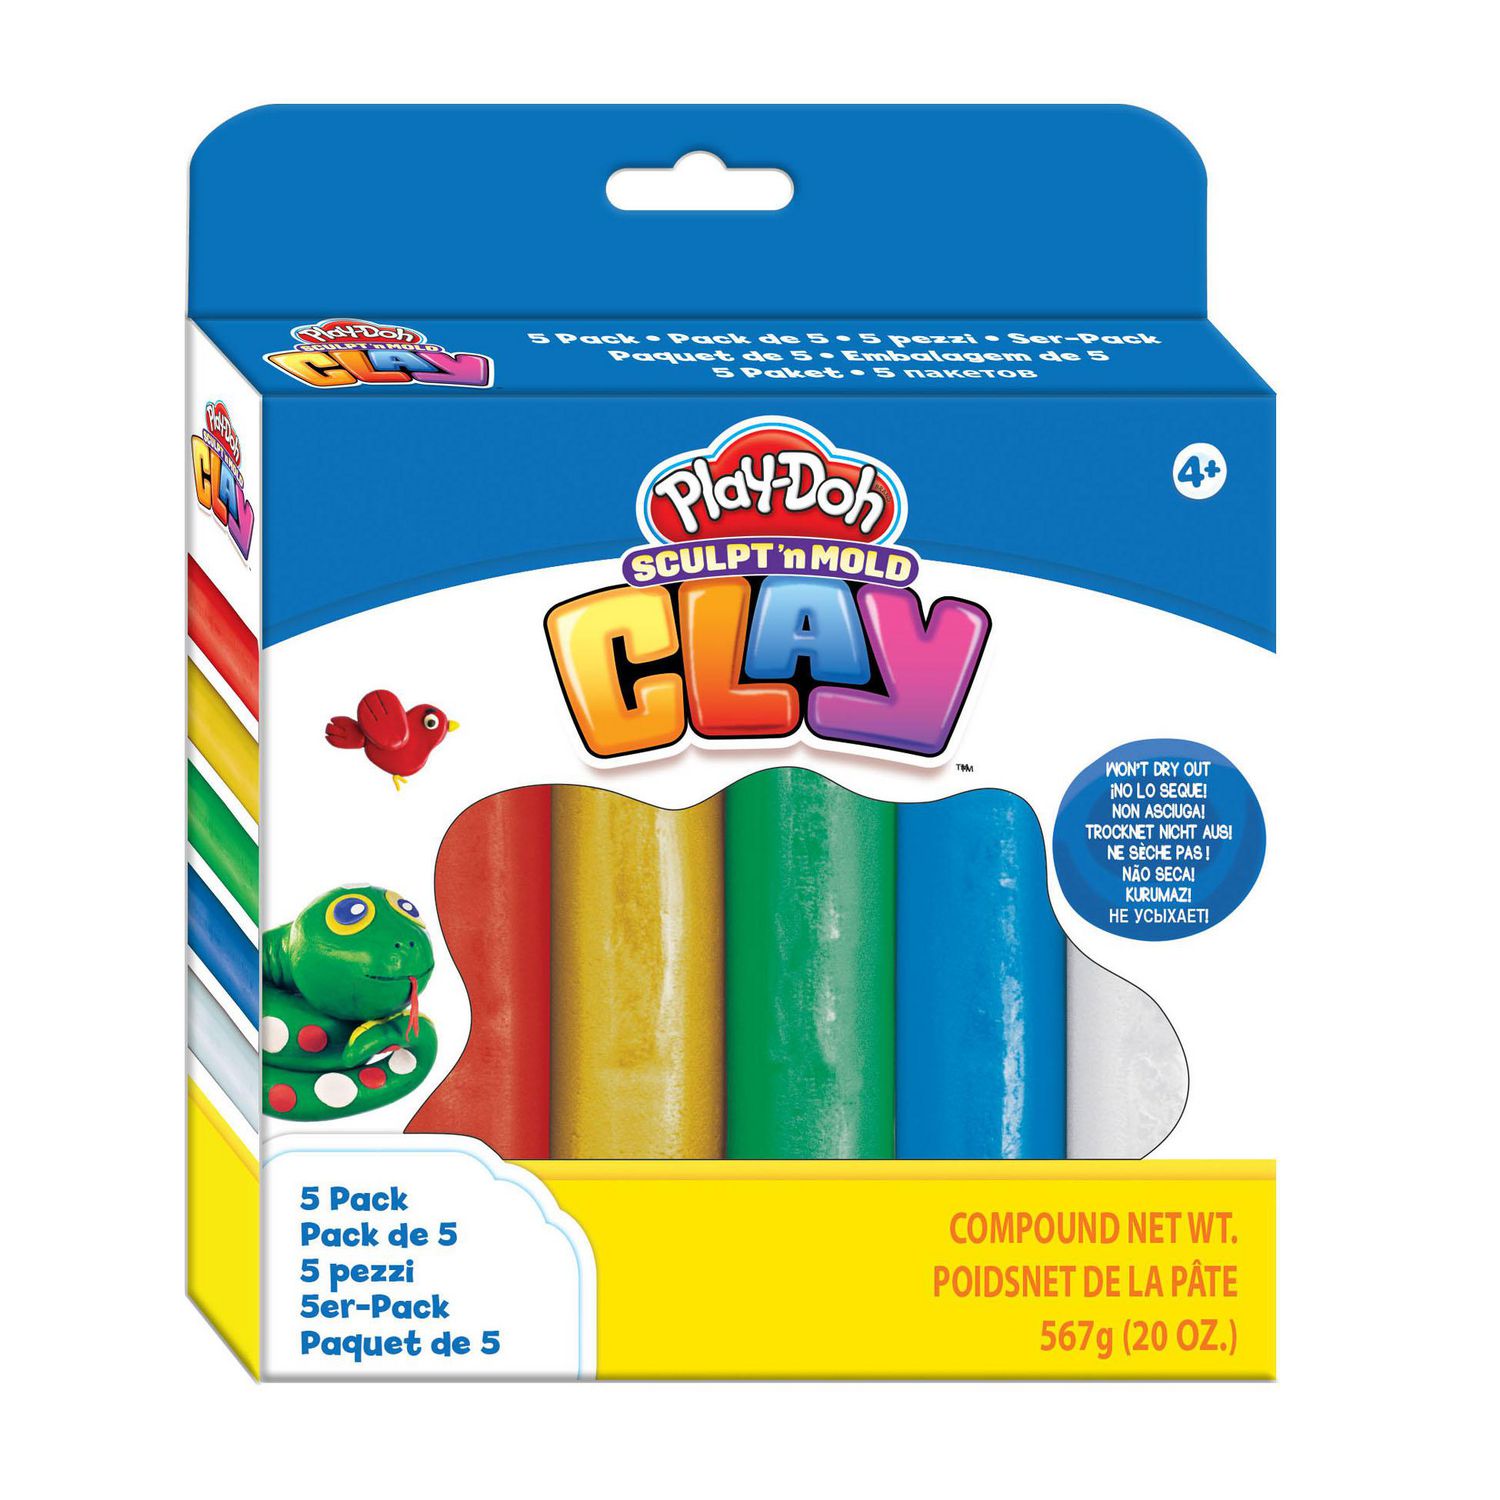 8-Pack Playdoh Sculpt N Mold Clay Multi Color NEW/ for sale online